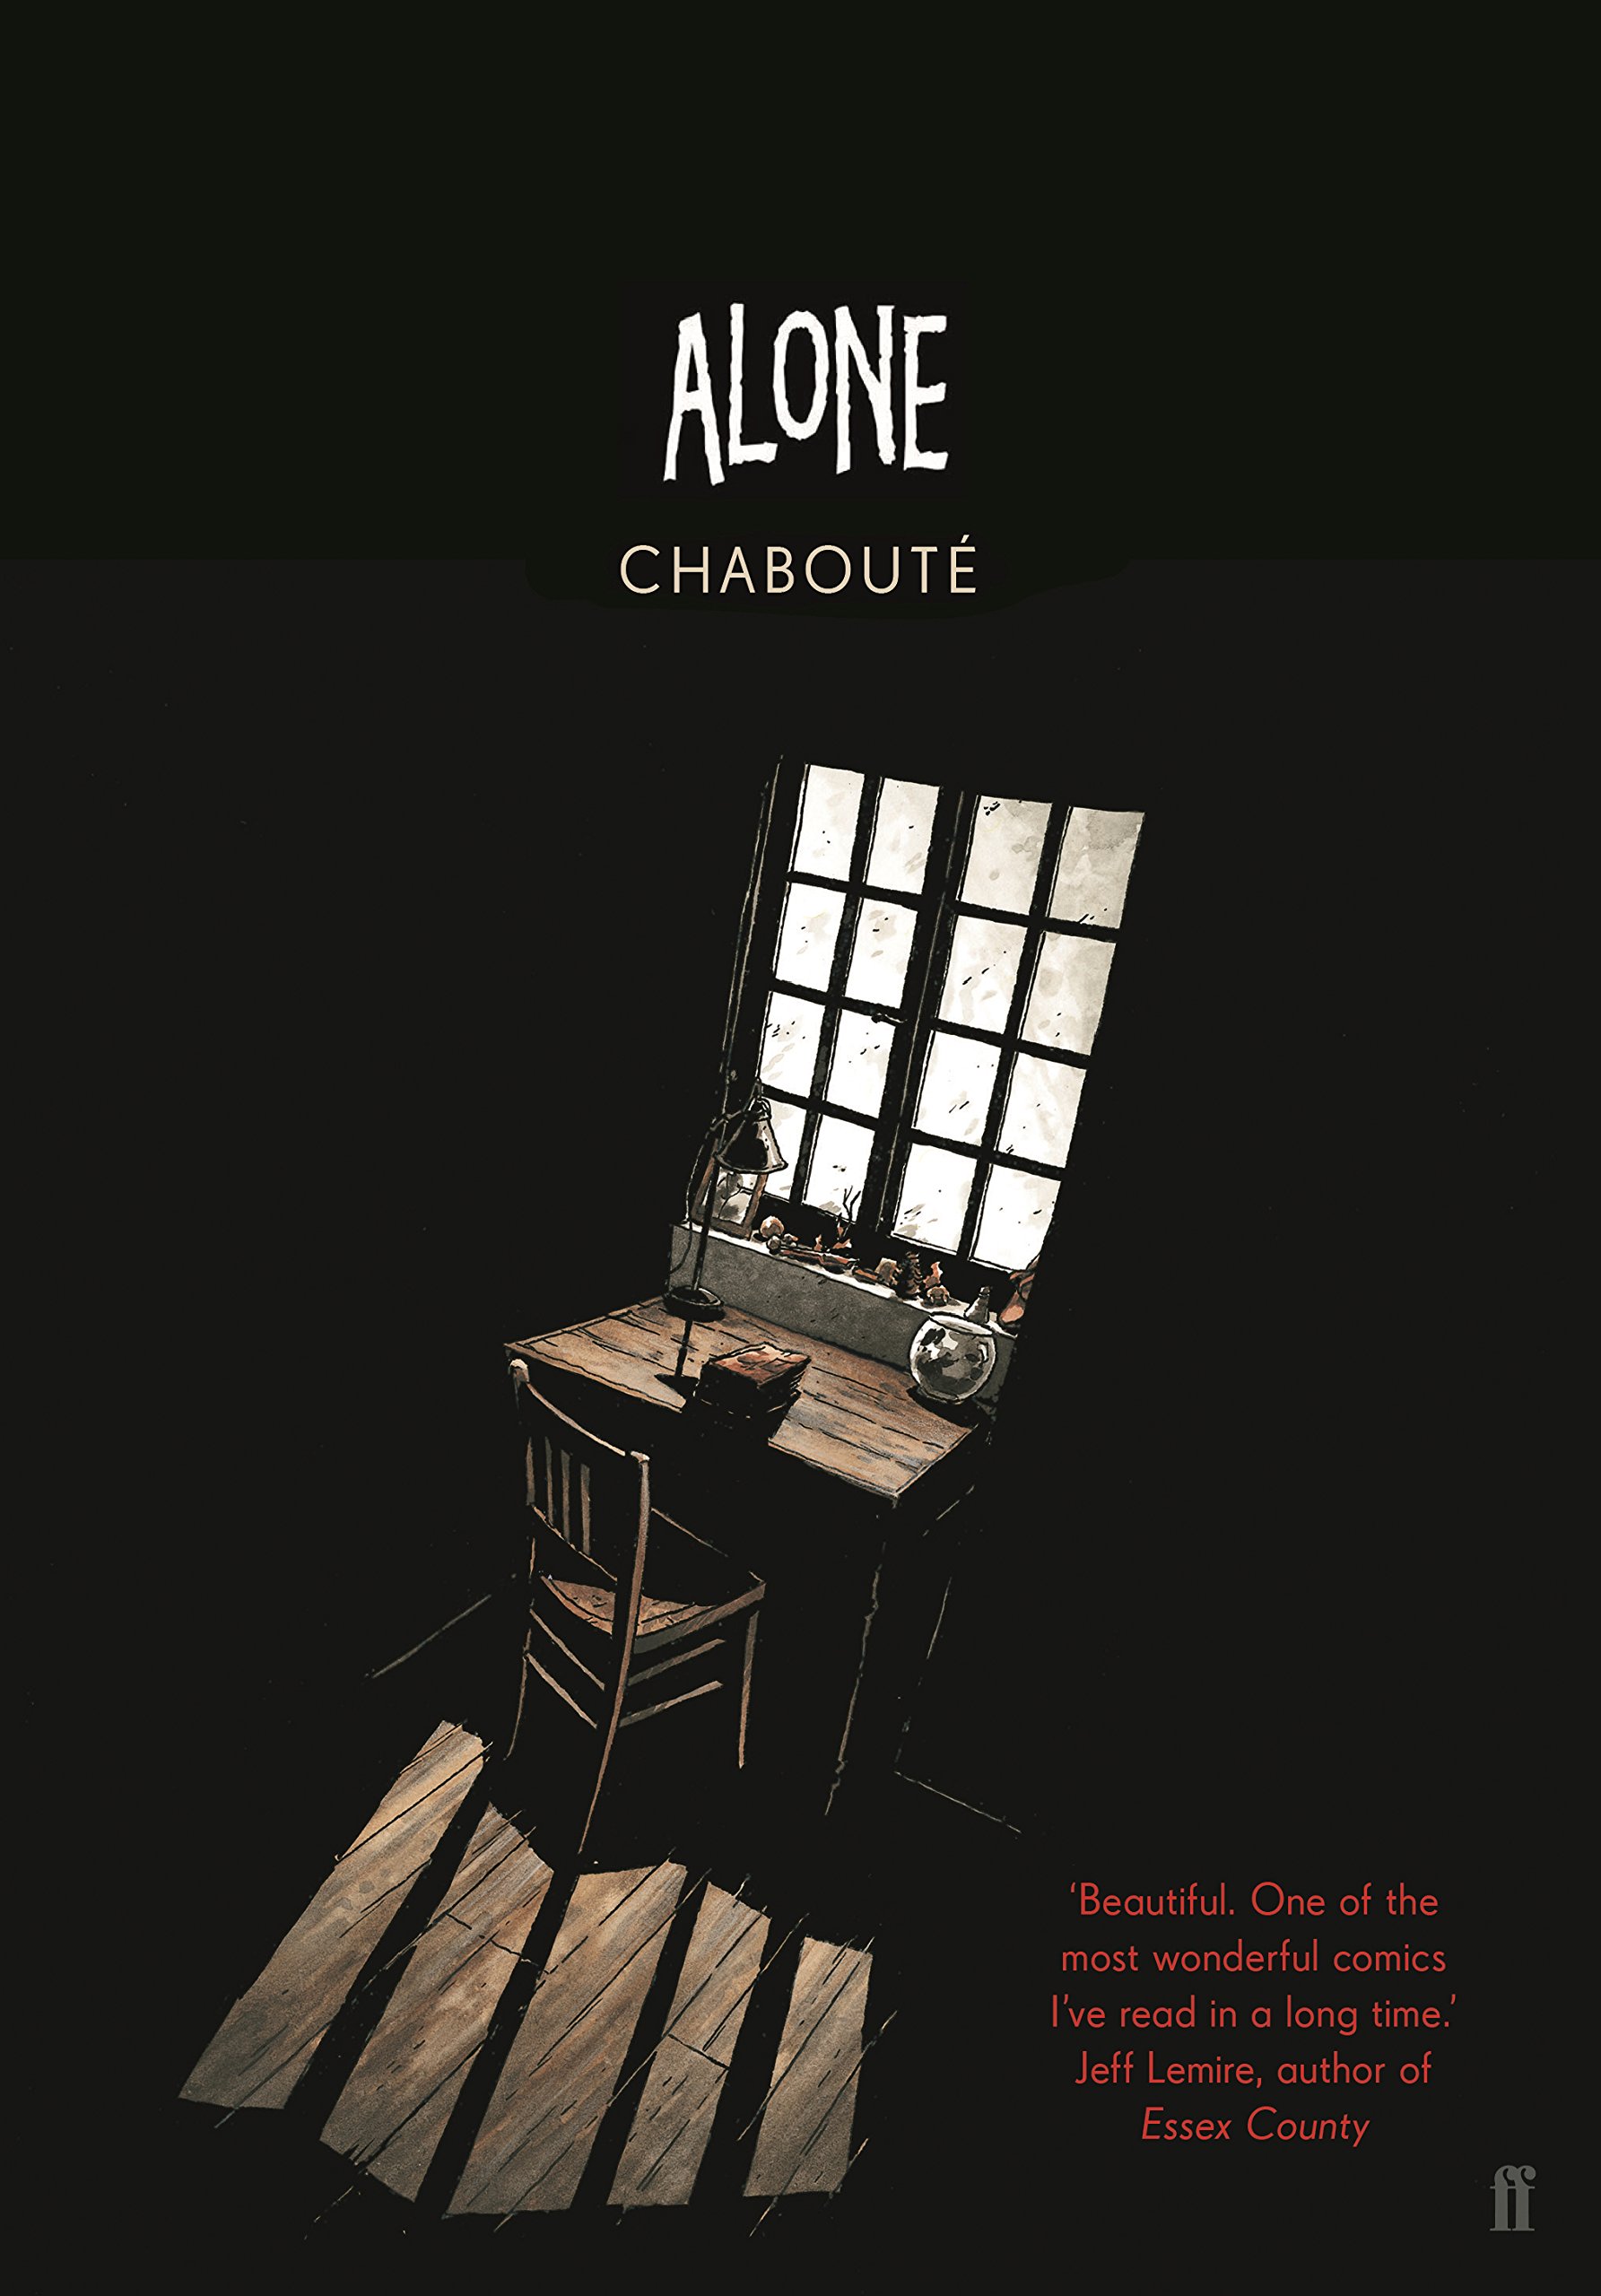 Alone | Chaboute